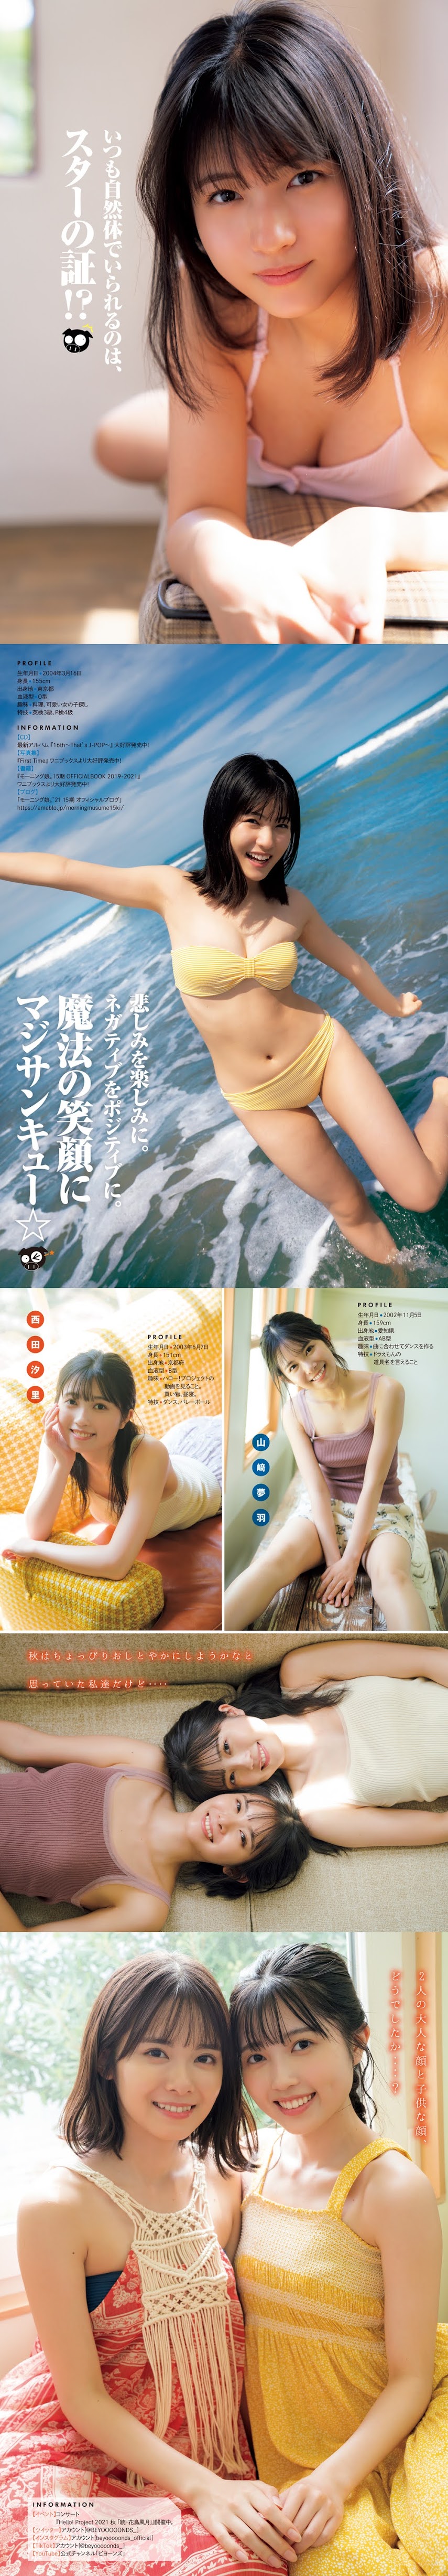 [Monthly Young Magazine] 2021 No.11 北川莉央 山﨑夢羽 西田汐里   P214594Real Street Angels